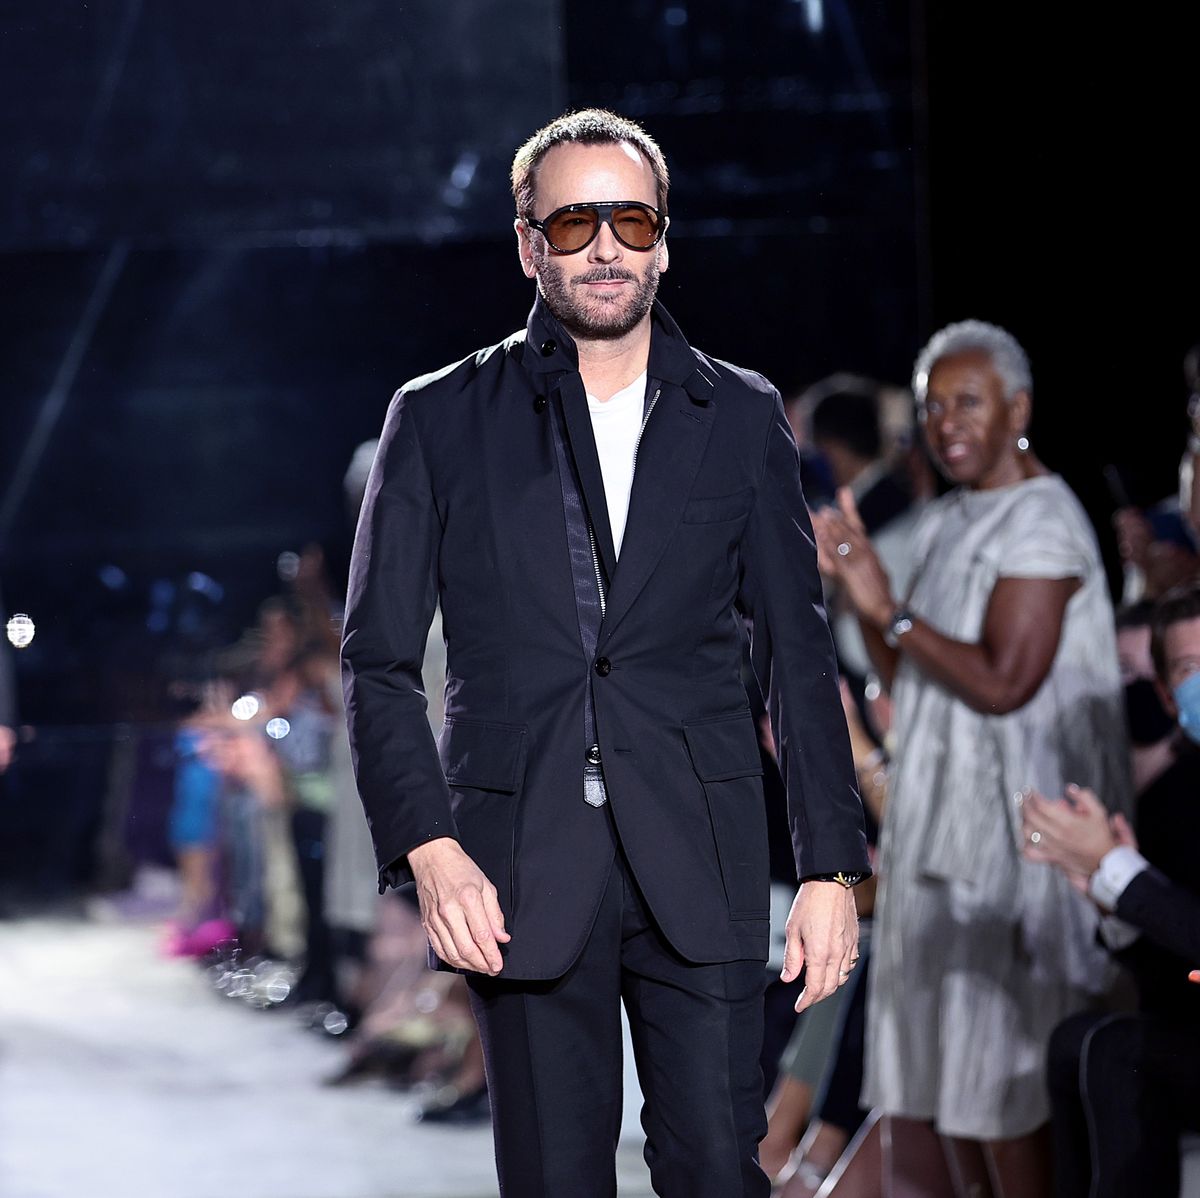 https://hips.hearstapps.com/hmg-prod/images/designer-tom-ford-walks-the-runway-for-tom-ford-during-nyfw-news-photo-1682589477.jpg?crop=0.668xw:1.00xh;0.160xw,0&resize=1200:*